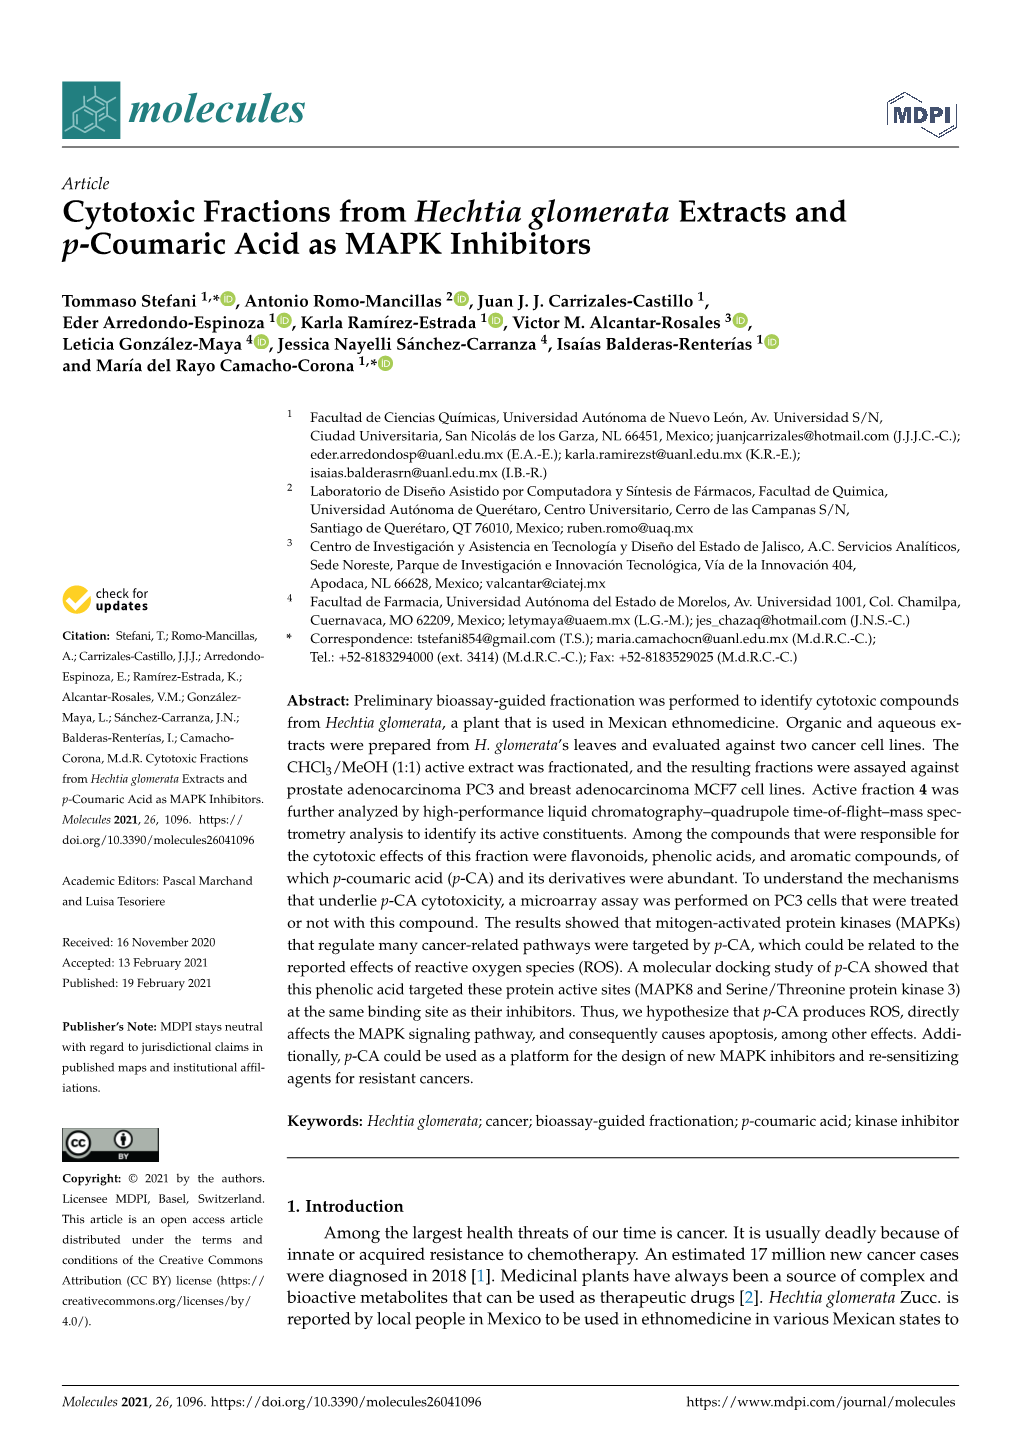 Cytotoxic Fractions from Hechtia Glomerata Extracts and P-Coumaric Acid As MAPK Inhibitors